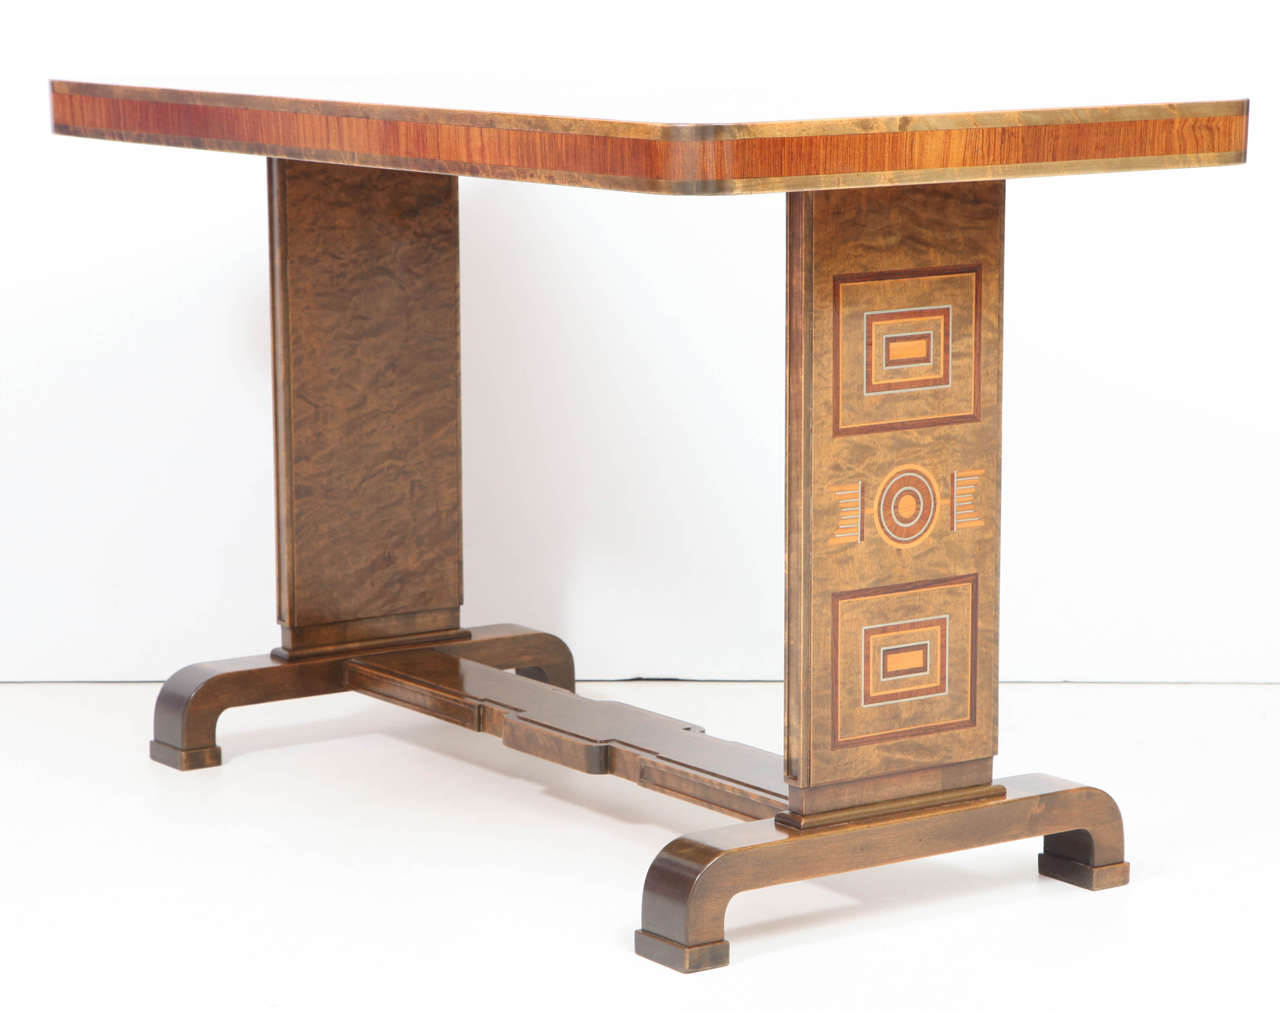 A rare Swedish birch, elm, fruitwood and pewter inlaid center table probably by Carl Bergsten, Circa 1930s, the rectangular cross-banded top with slightly rounded corners raised on two rectangular end supports with unique inlay work, ending with a